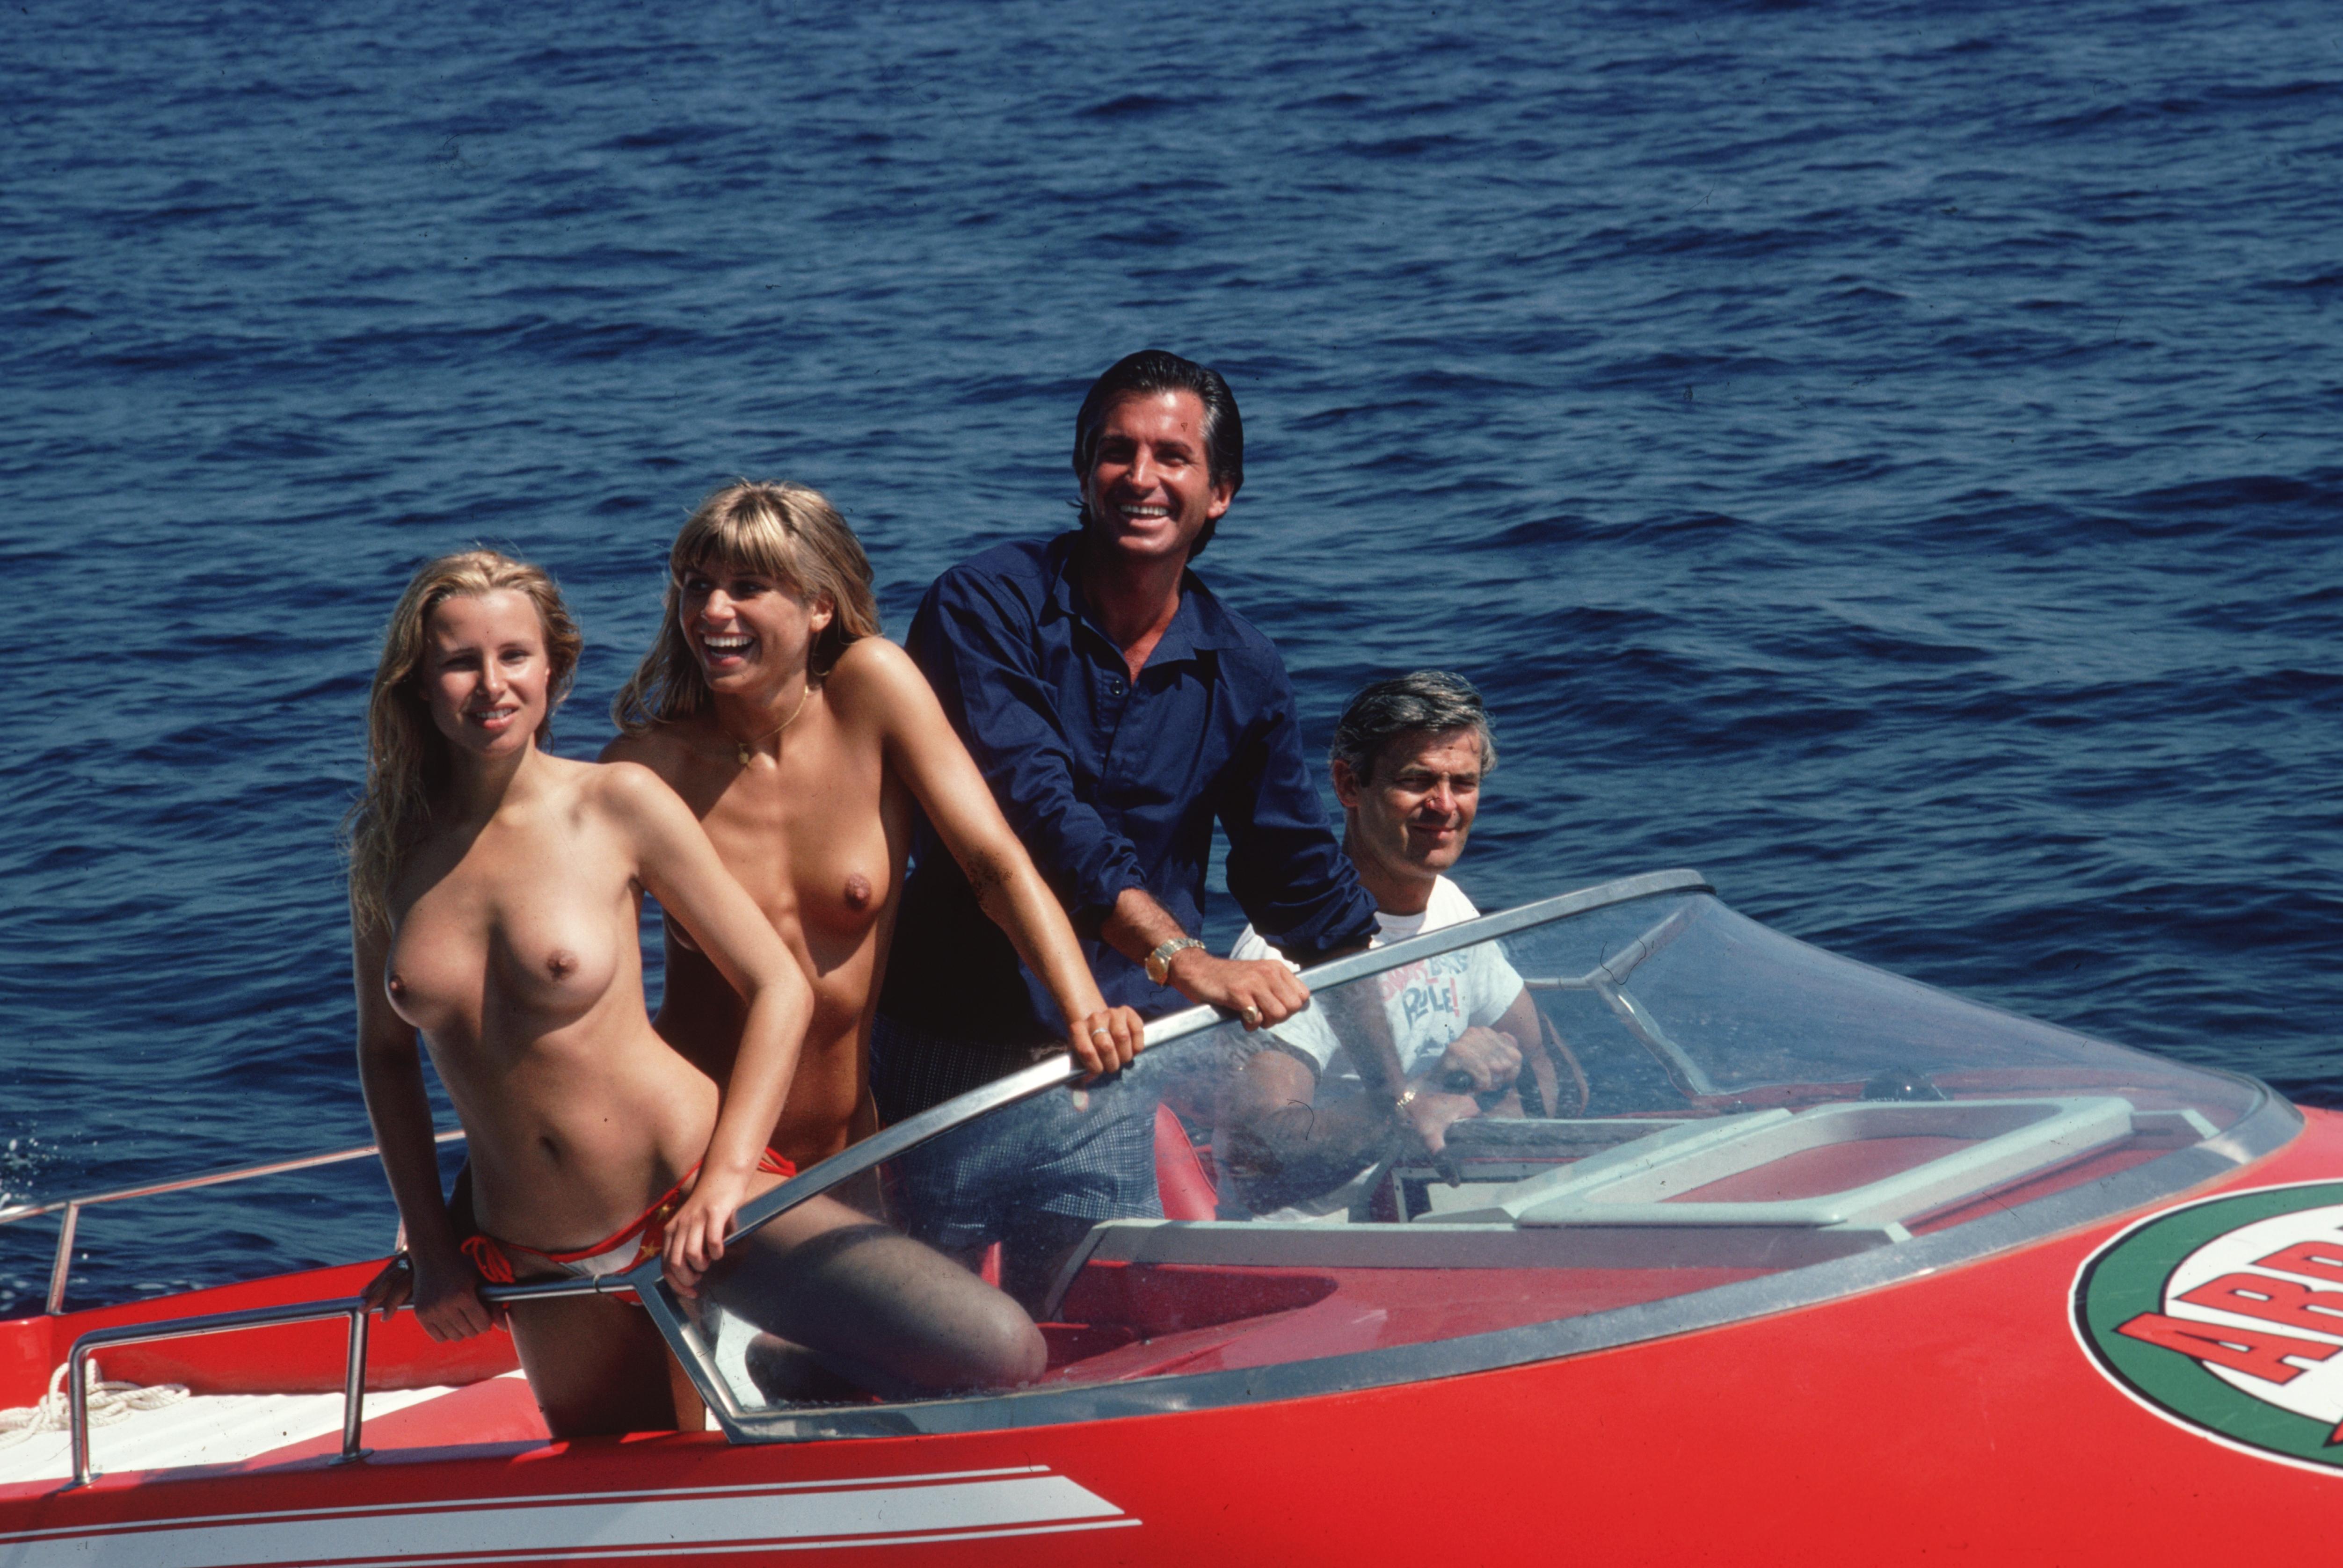 Slim Aarons
The High Life
1977. (printed later)
C print 
Estate stamped and numbered edition of 150 
with Certificate of authenticity

August 1977: Actor George Hamilton (in blue) takes off in a speedboat with friends Ruth Luthi and Mike Belami,